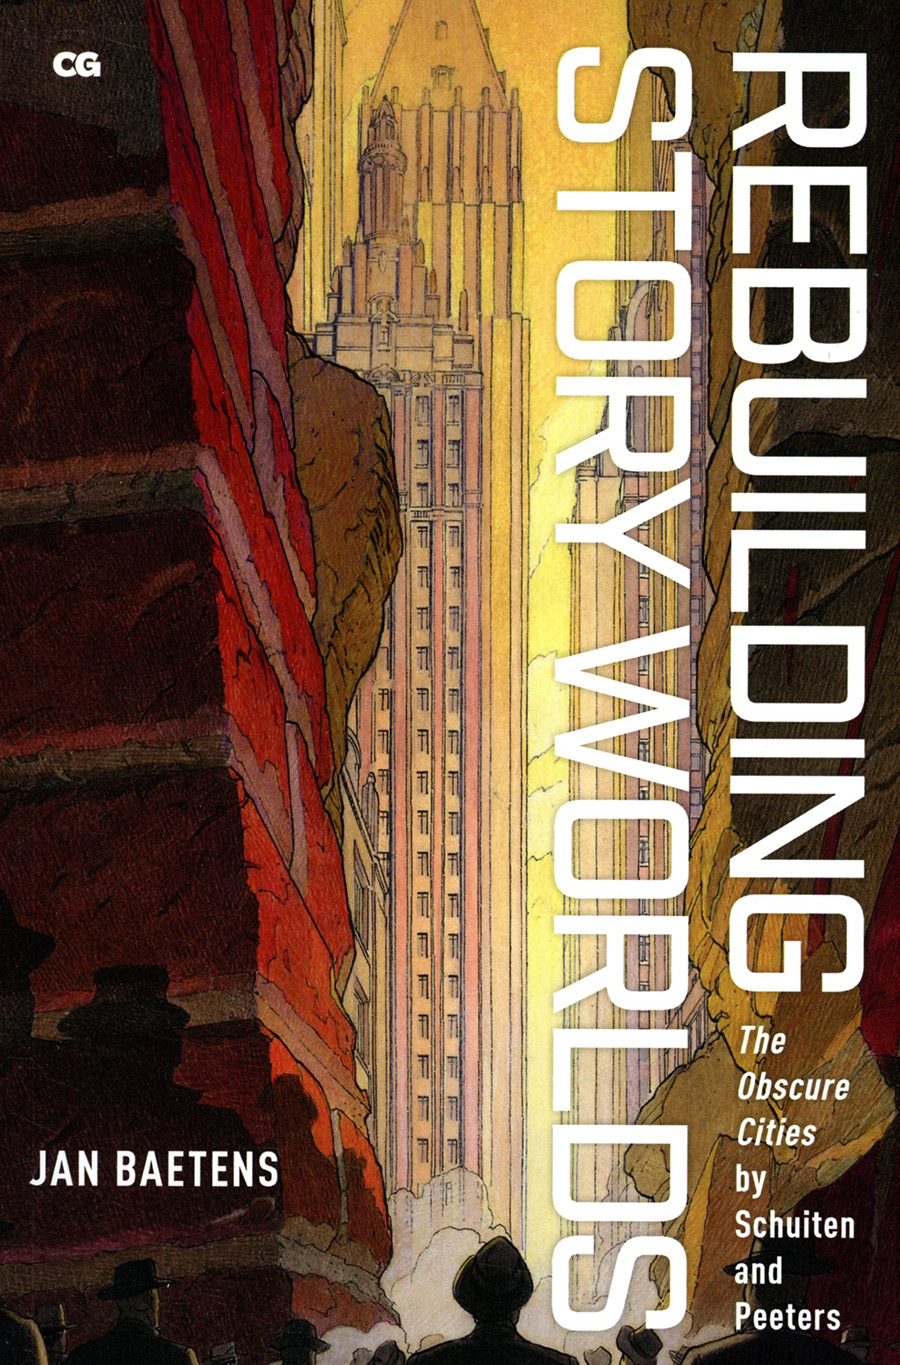 Rebuilding Story Worlds Obscure Cities By Schuiten And Peeters SC